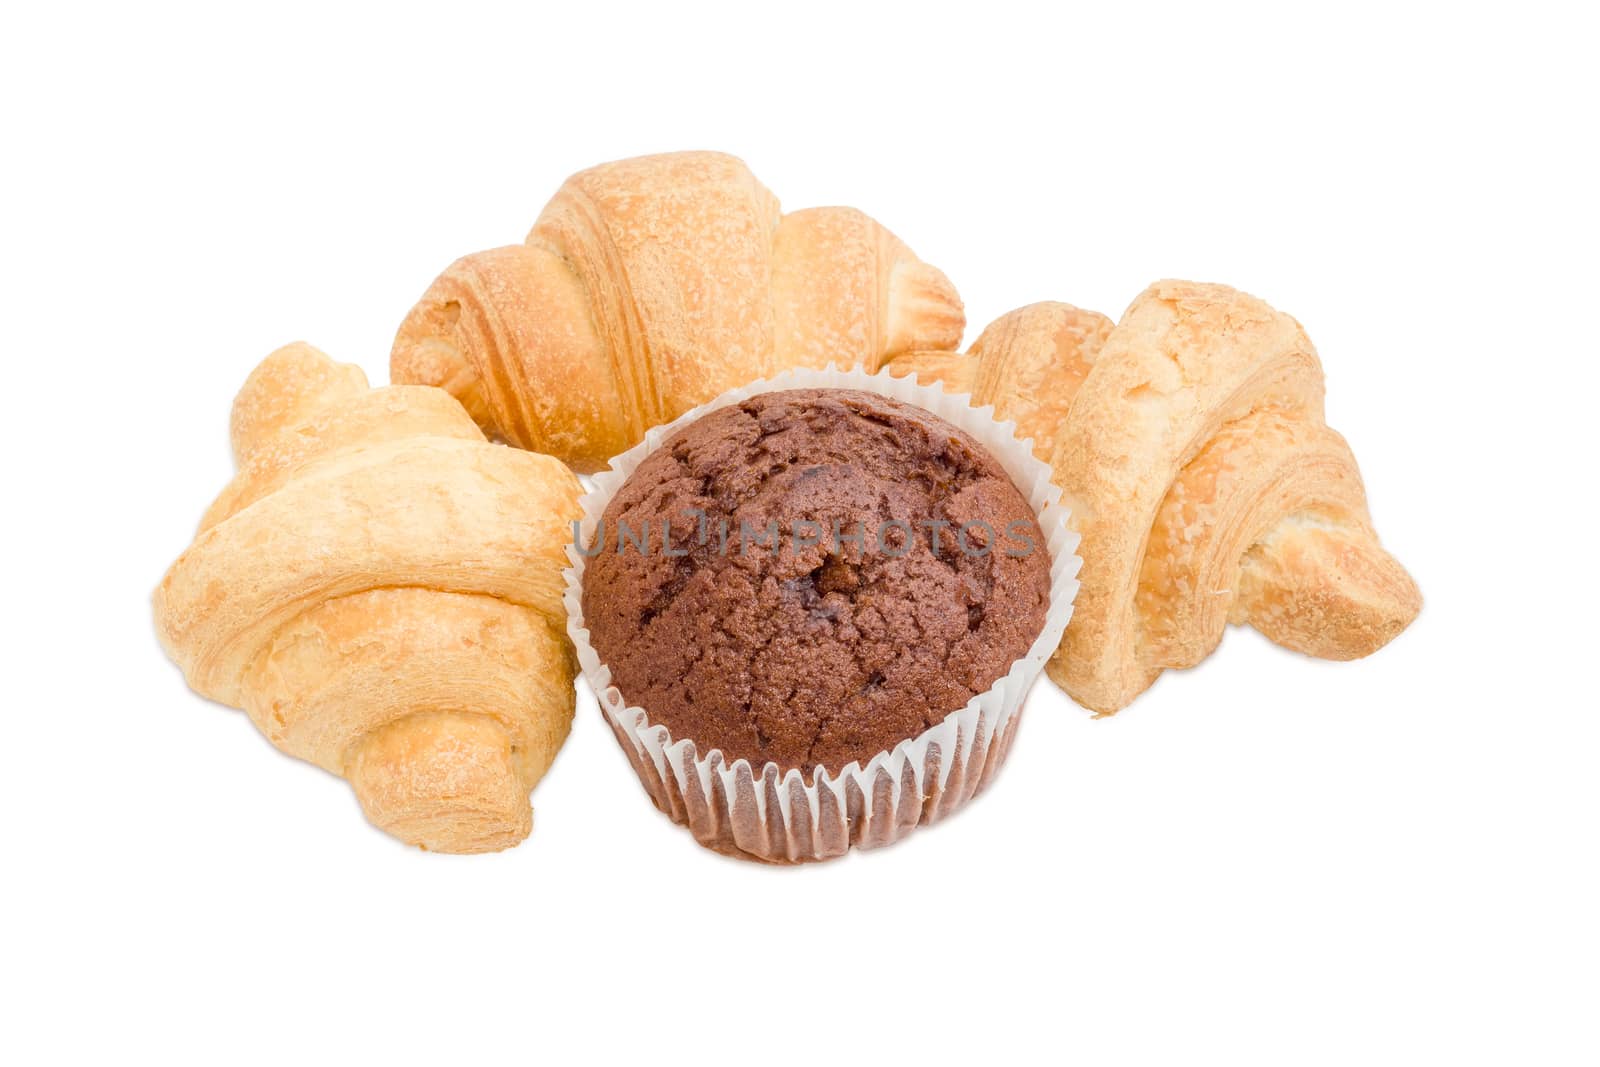 Three small croissant and sweet chocolate muffin in a paper cup on a light background
